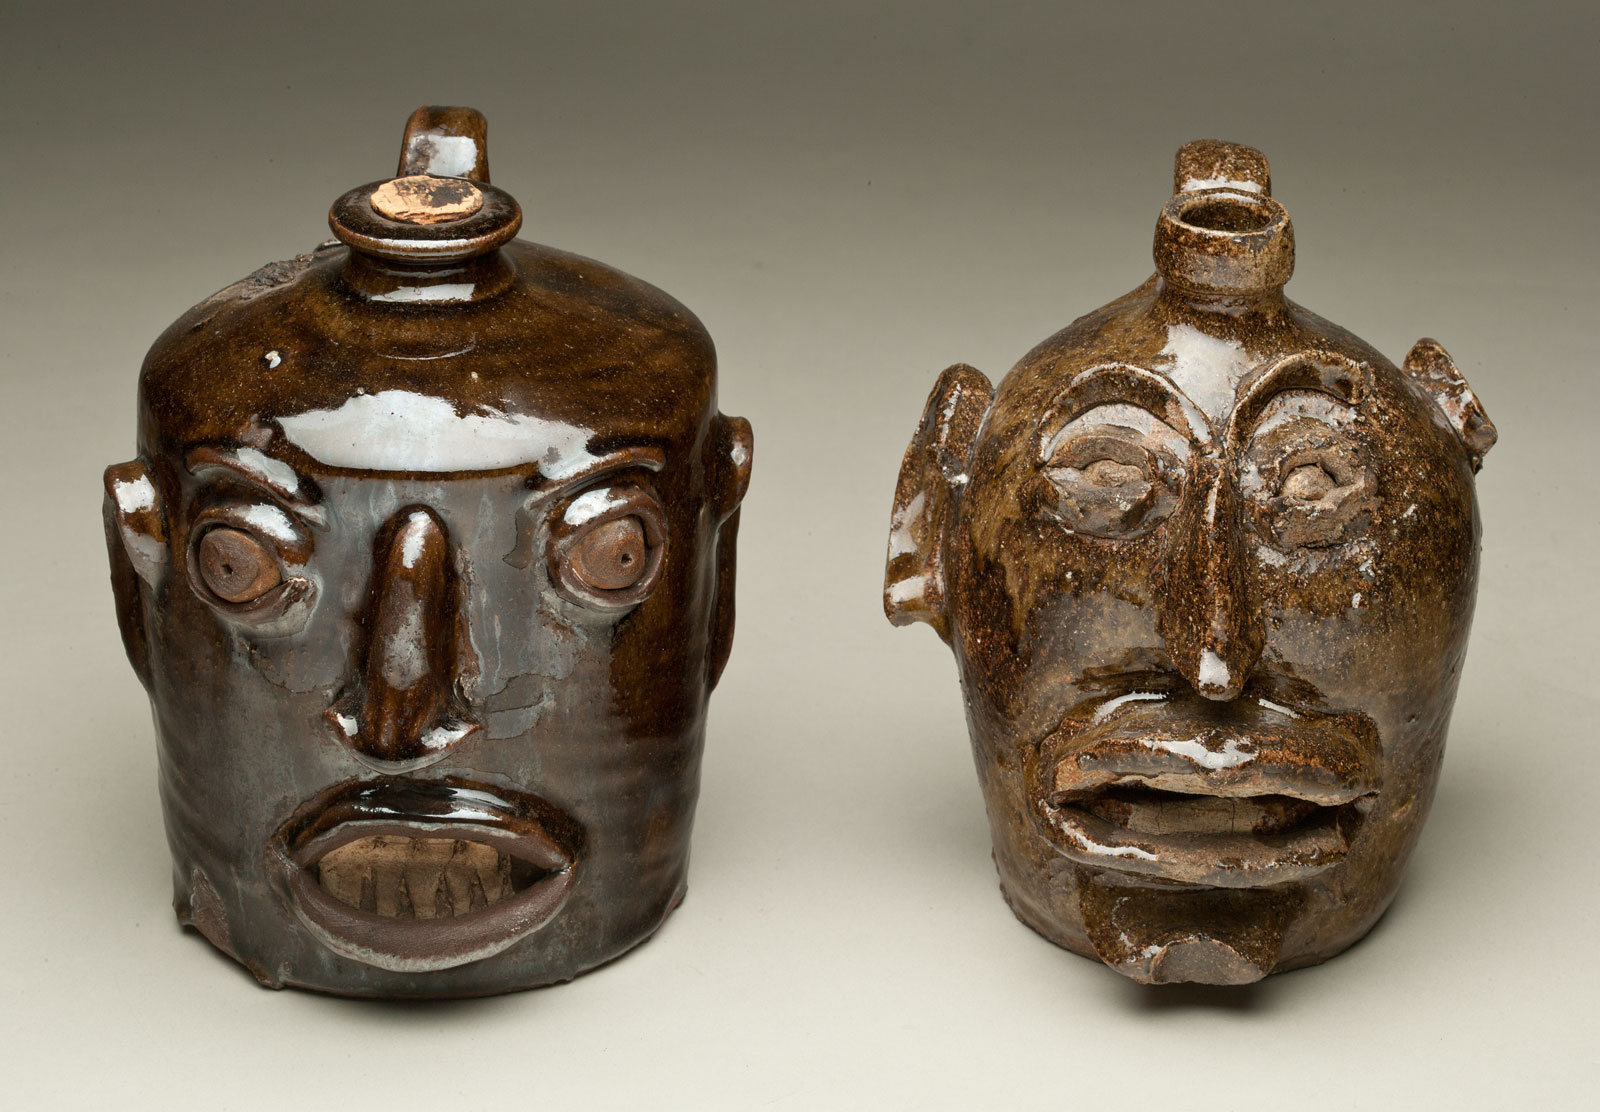 Face jugs from the Edgefield District, South Carolina, circa 1860-1880